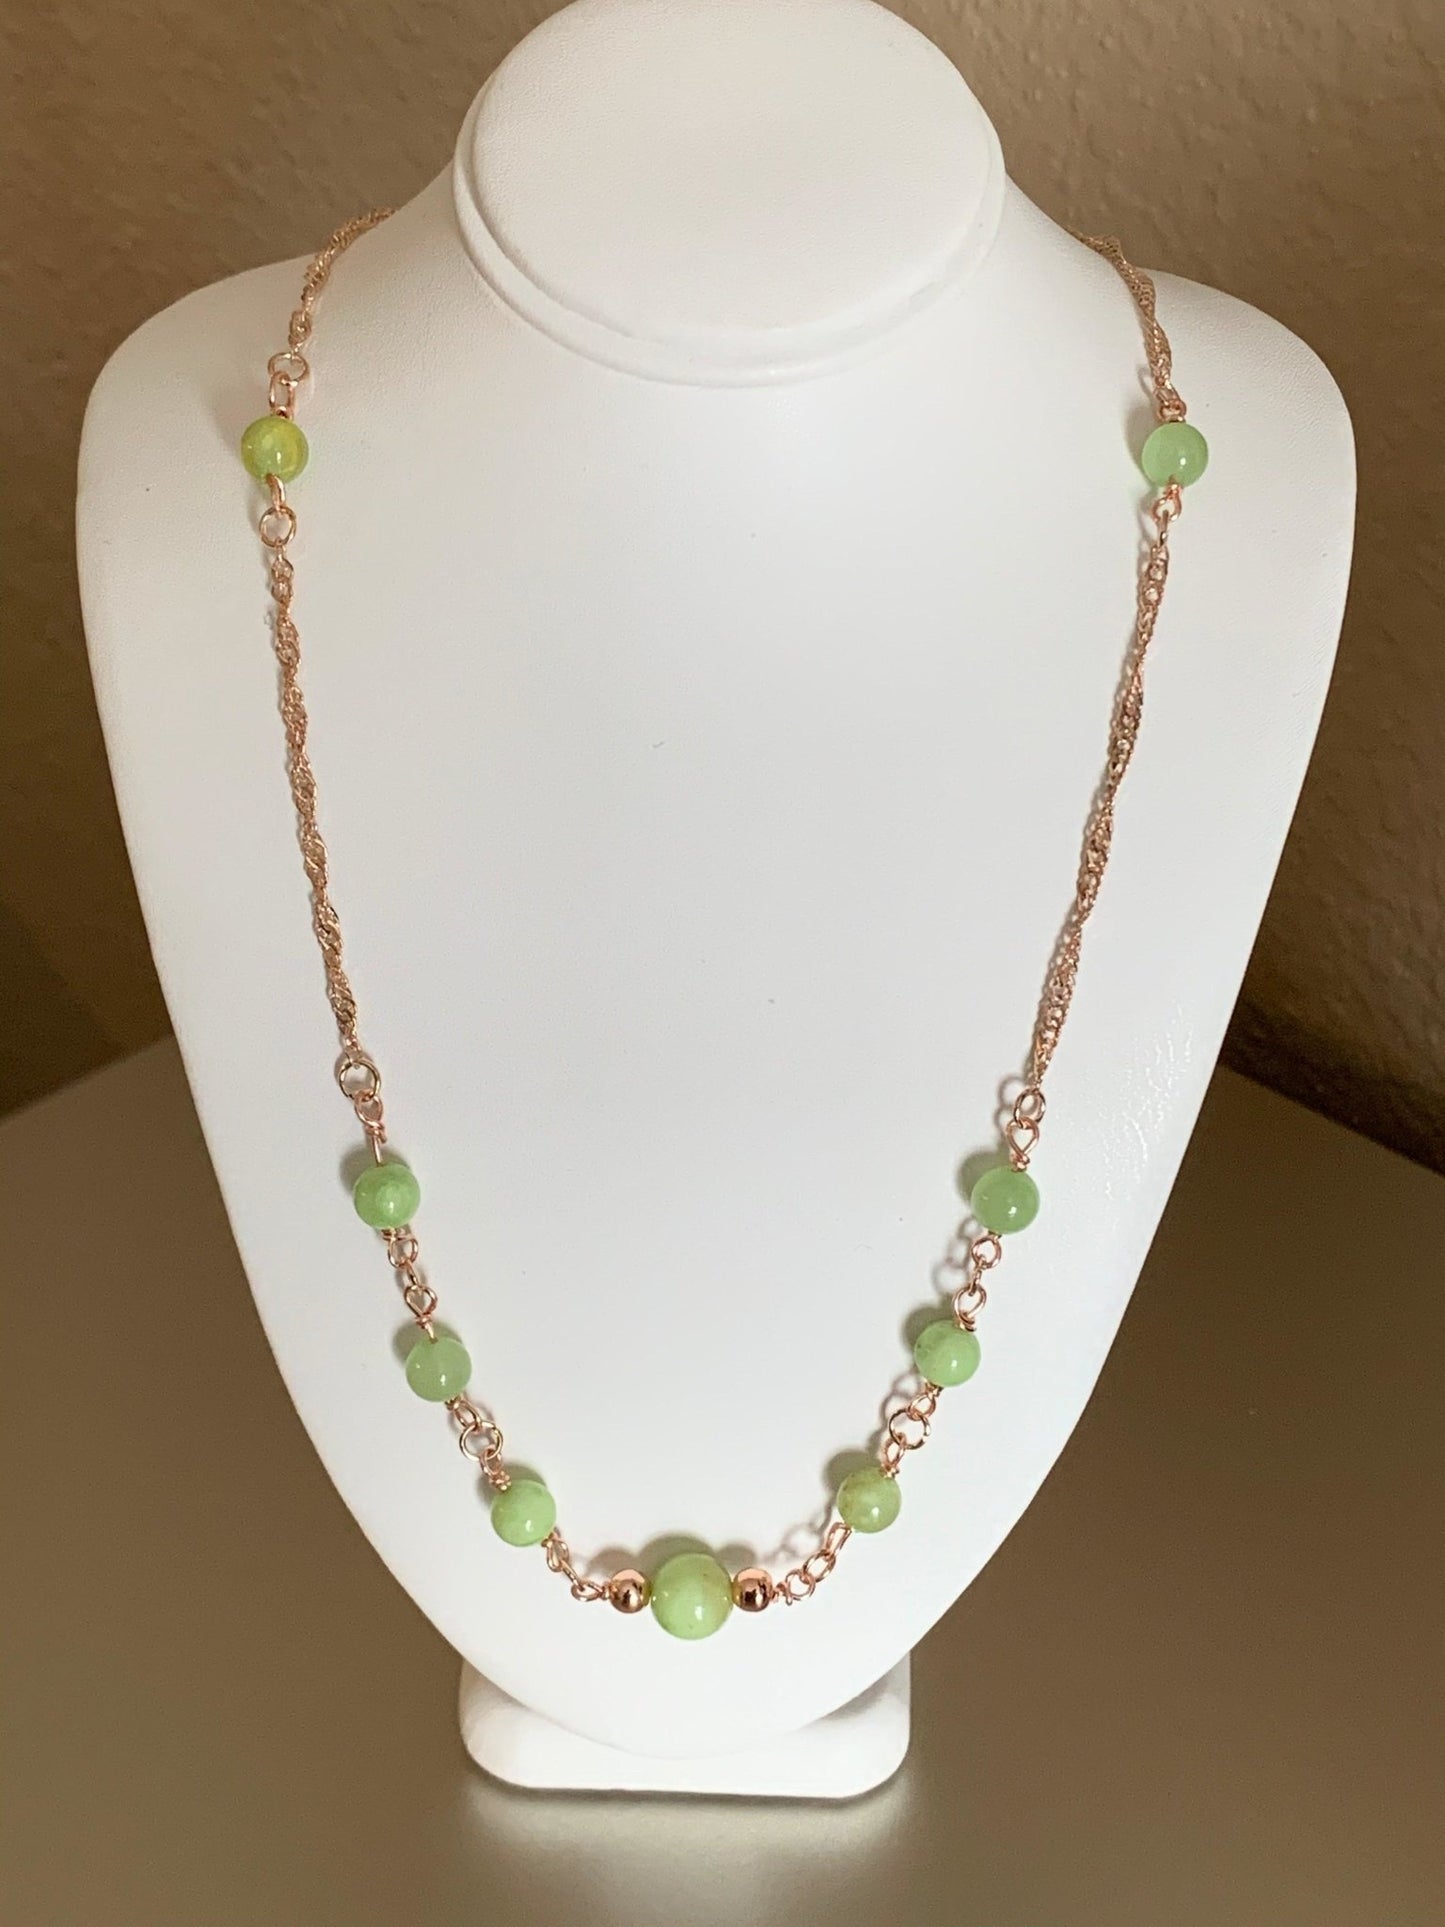 🔴Sold🔴 Jade Moons Handmade Wire Wrapped Rose Gold Necklace - Born Mystics